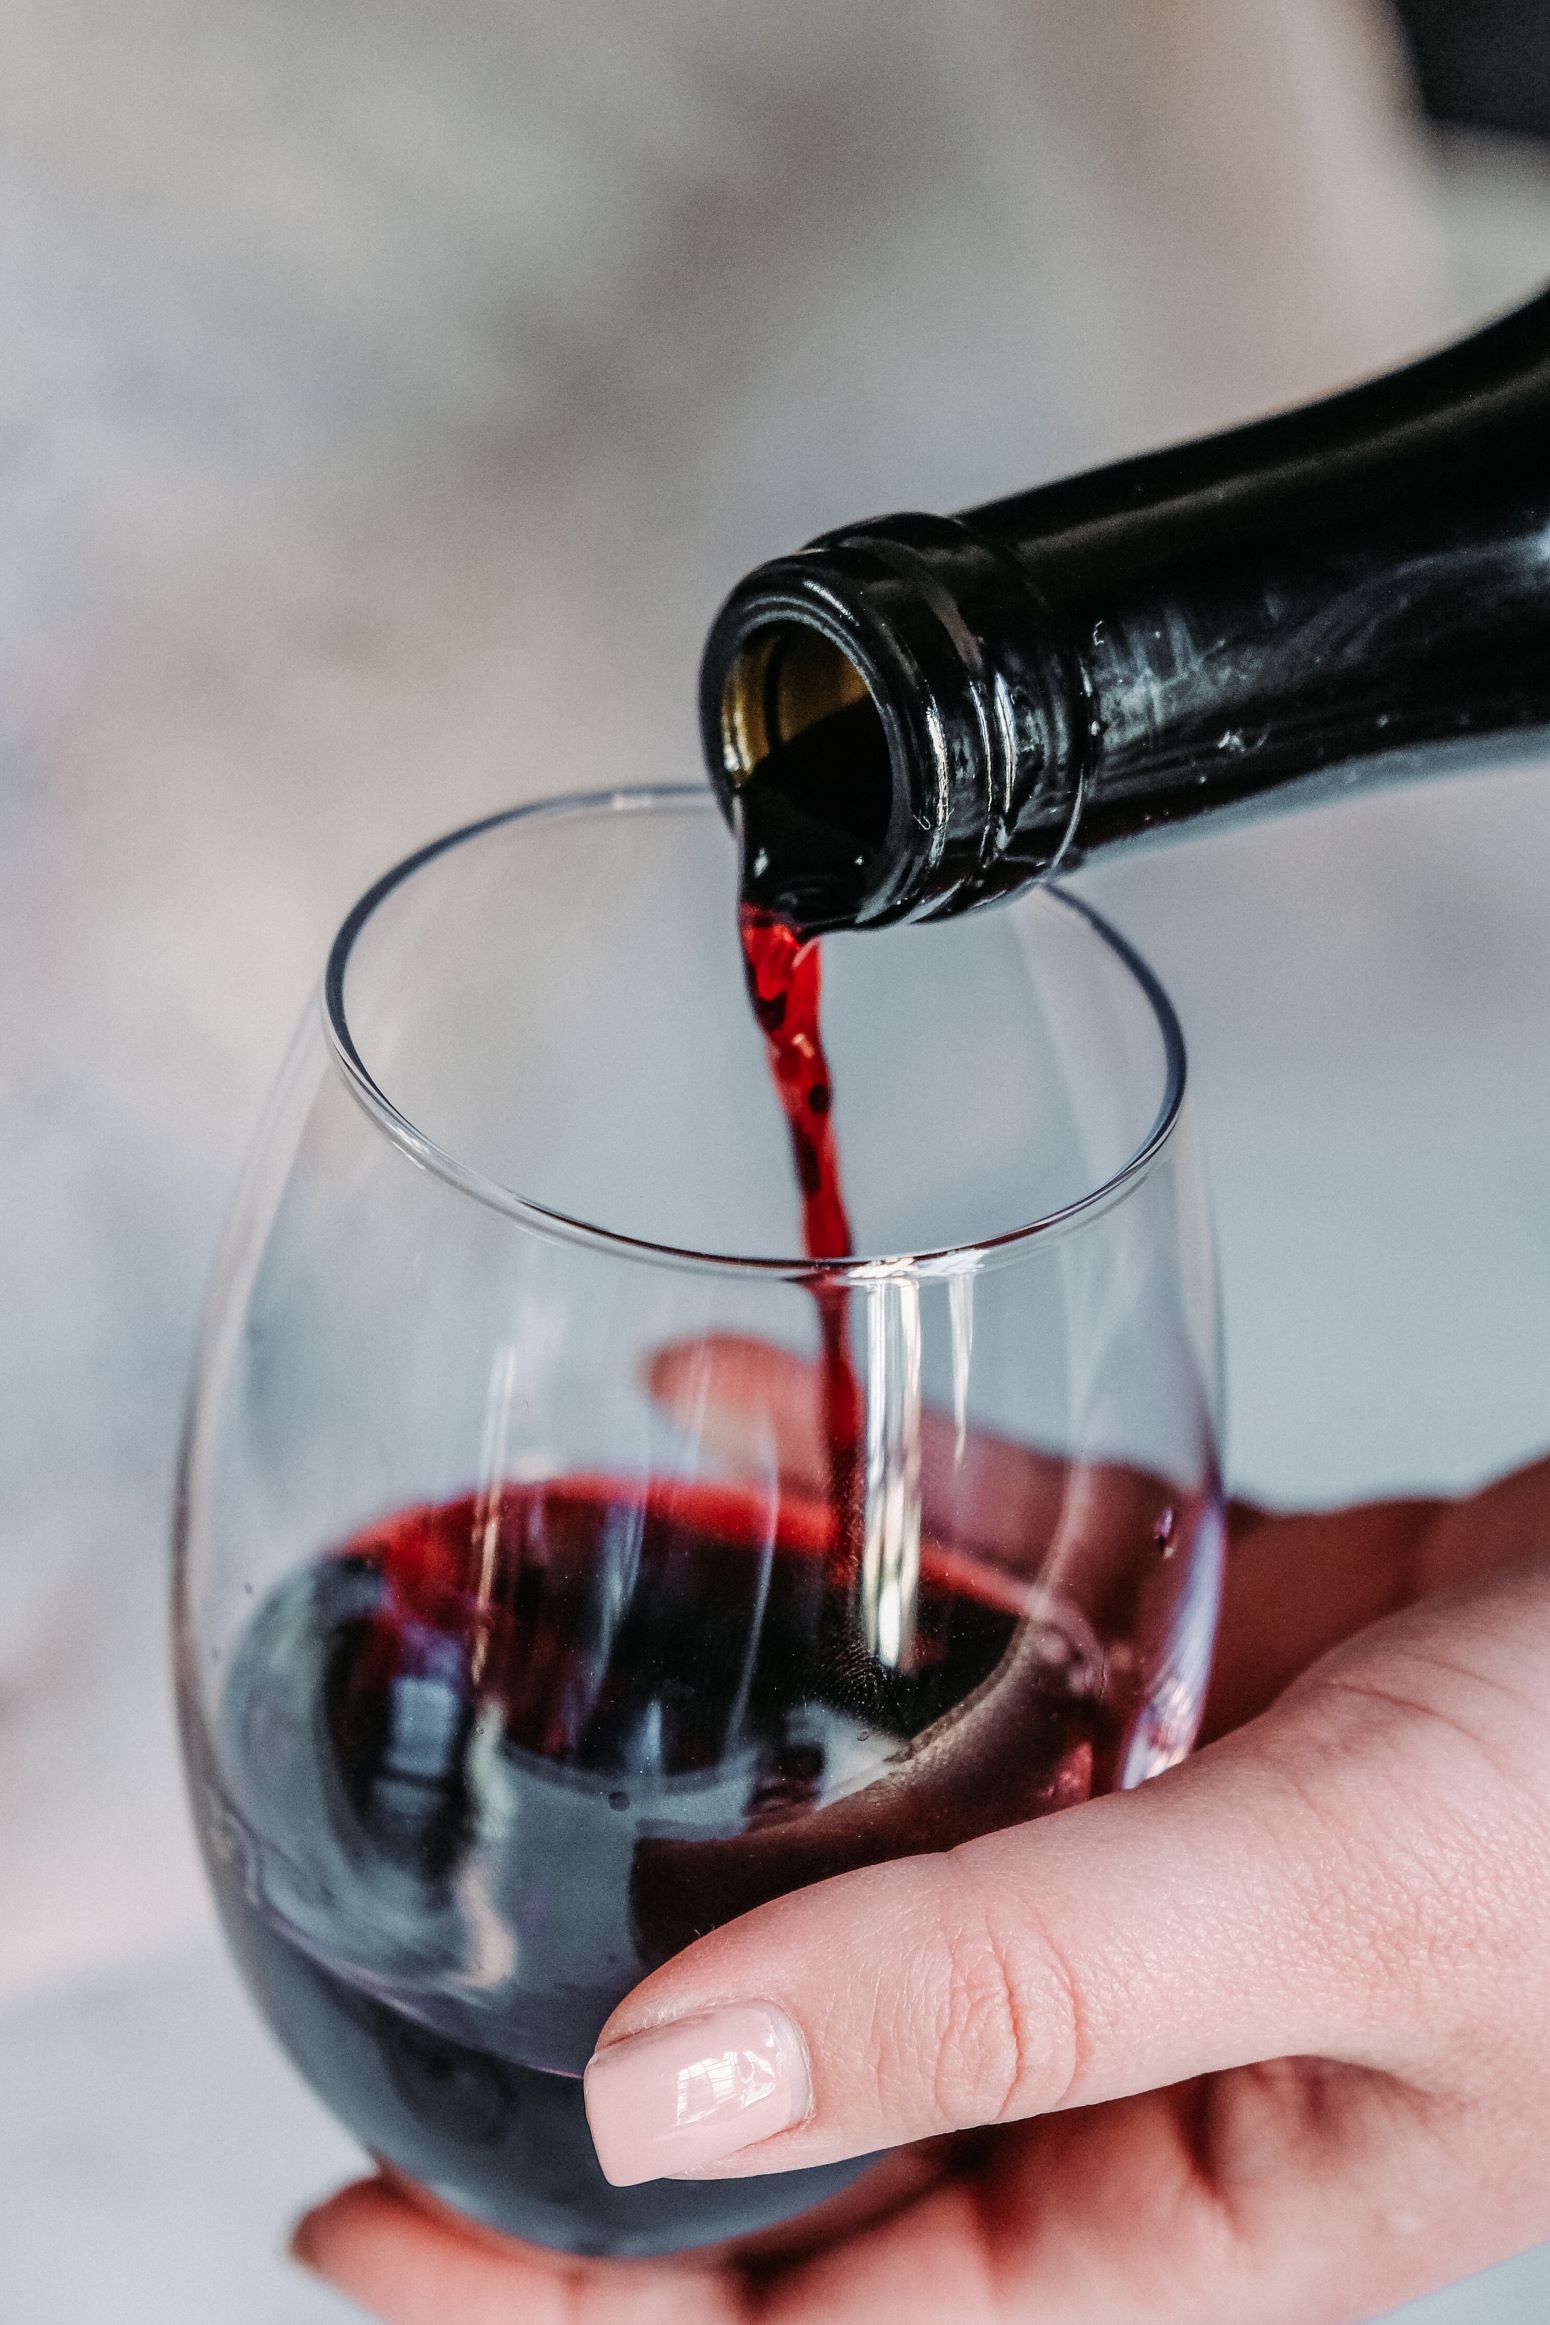 An image of a person holding a glass of red wine.